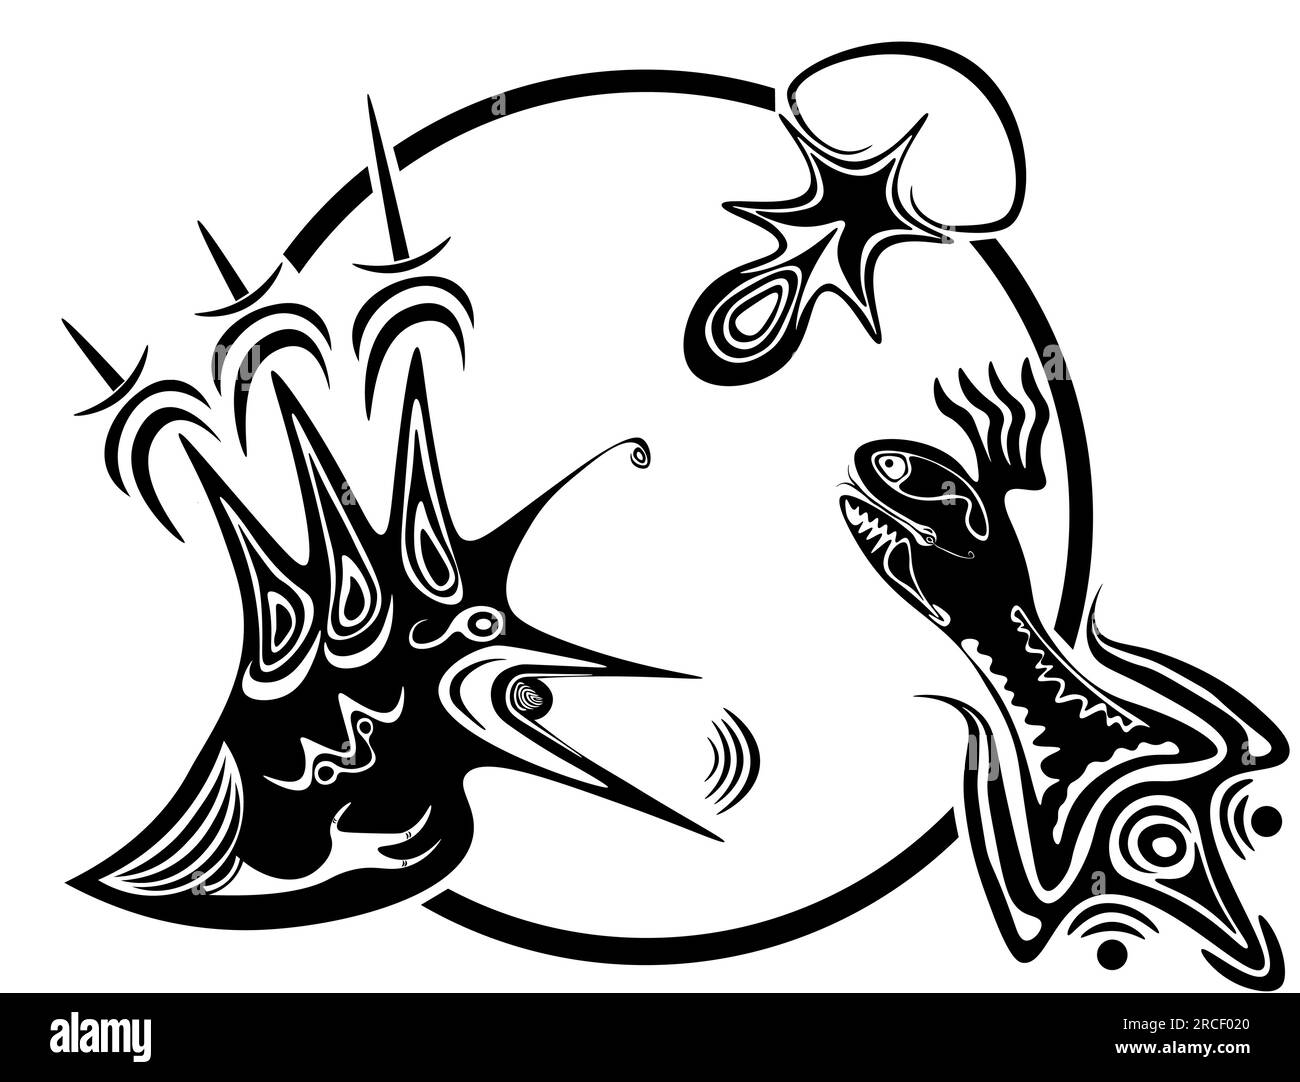 This abstract vector illustration in black and white showcases three figures connected within a circle: a bird with sharp features and human-like foot Stock Vector